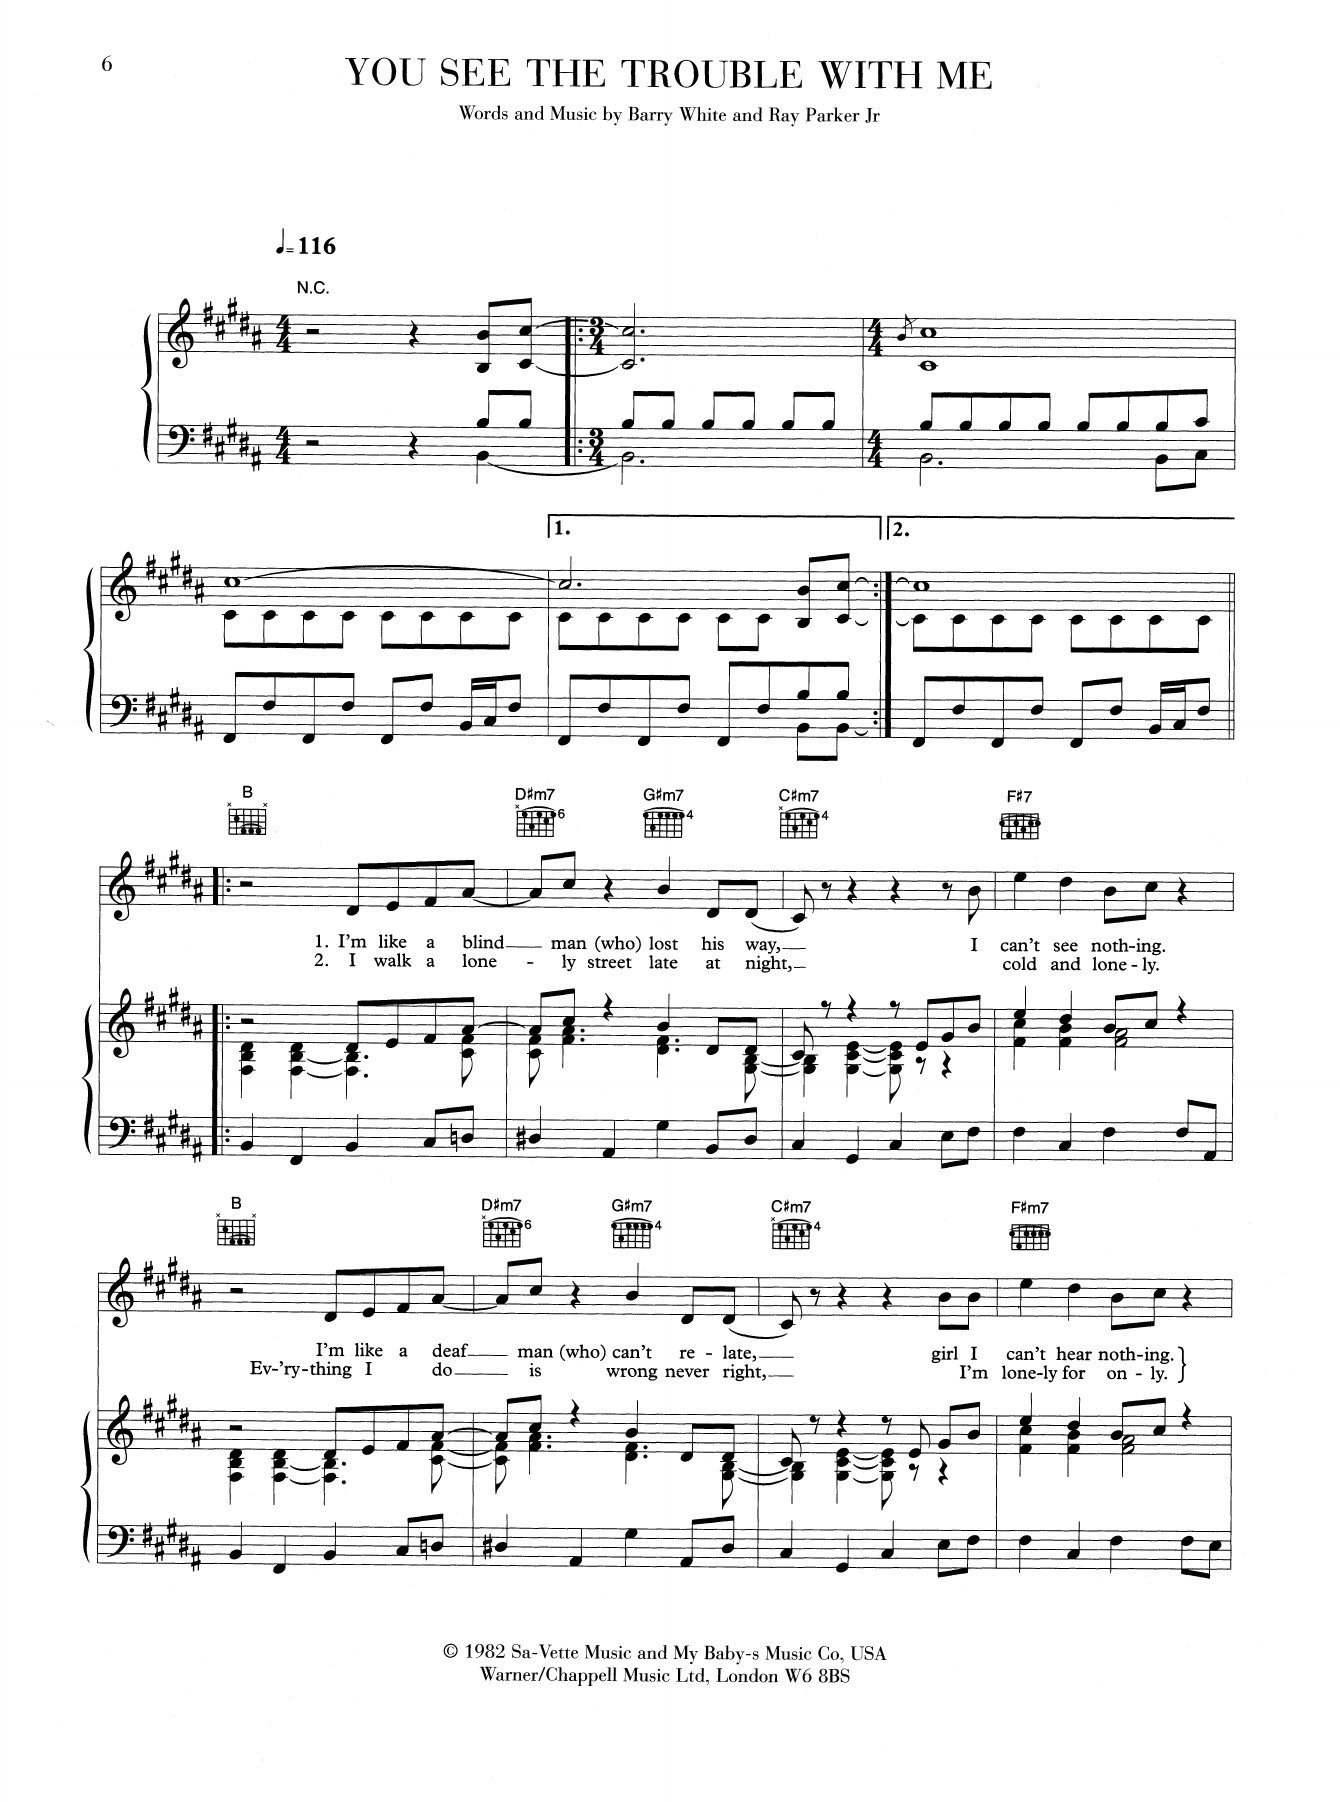 Download Barry White You See The Trouble With Me Sheet Music